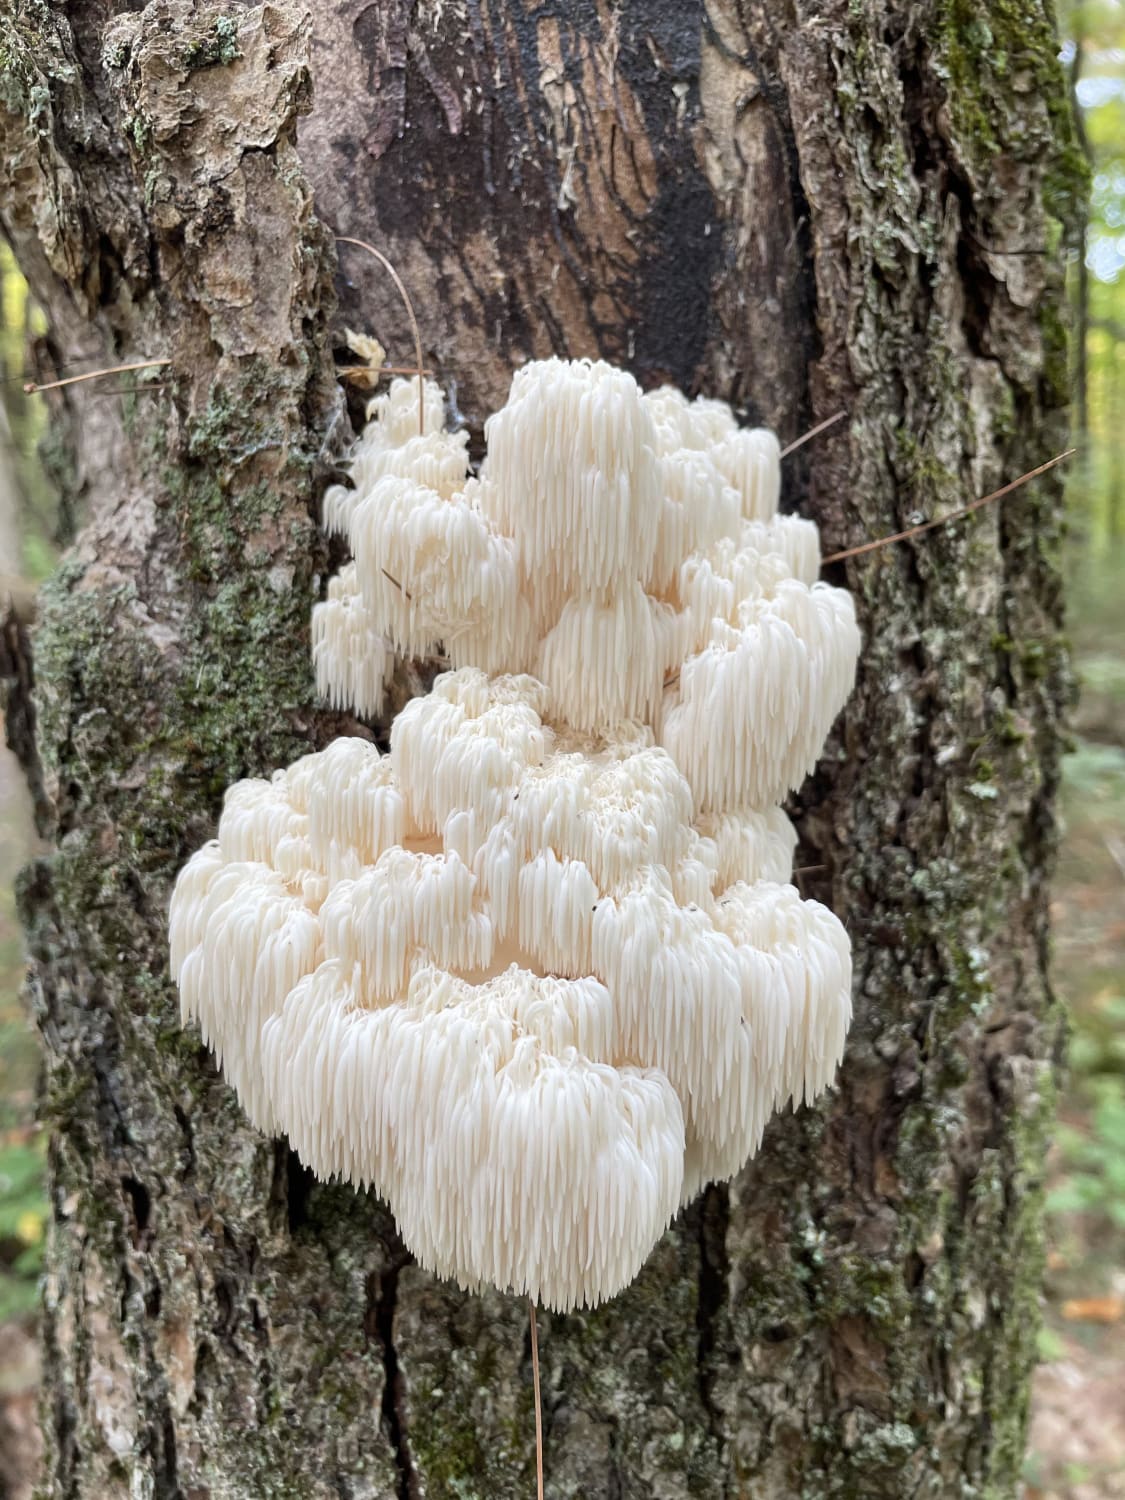 Walk in a forest in New Hampshire and saw this beautiful fungus